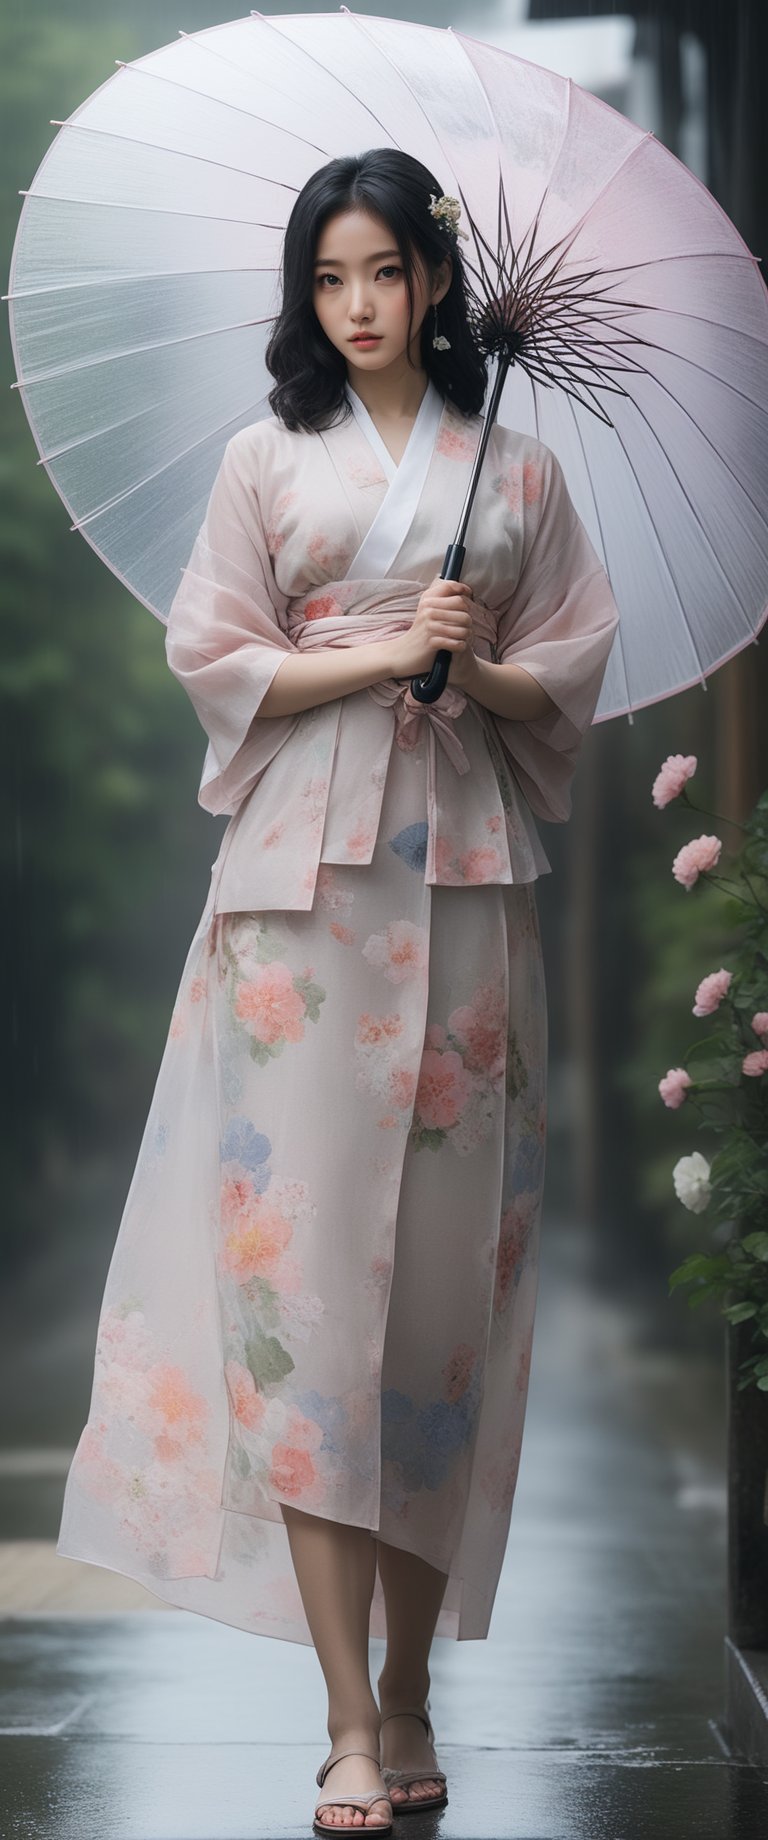 masterpiece, best quality, masterpiece, best quality, official art, extremely detailed, full body, looking at viewer, 1 korean girl, 20 years old, female solo, black hair, blush, flirtatious eyes, hair accessory, half length sleeve, holding an umbrella, standing in the rain, flower, outdoors, japanese clothes, hair flowers, kimono, blur, obi, colored skin, umbrella, obi, floral print, sandals, realistic, tabi socks, oil paper umbrella, japanese street, photo background, kanzashi
, ct-goeuun